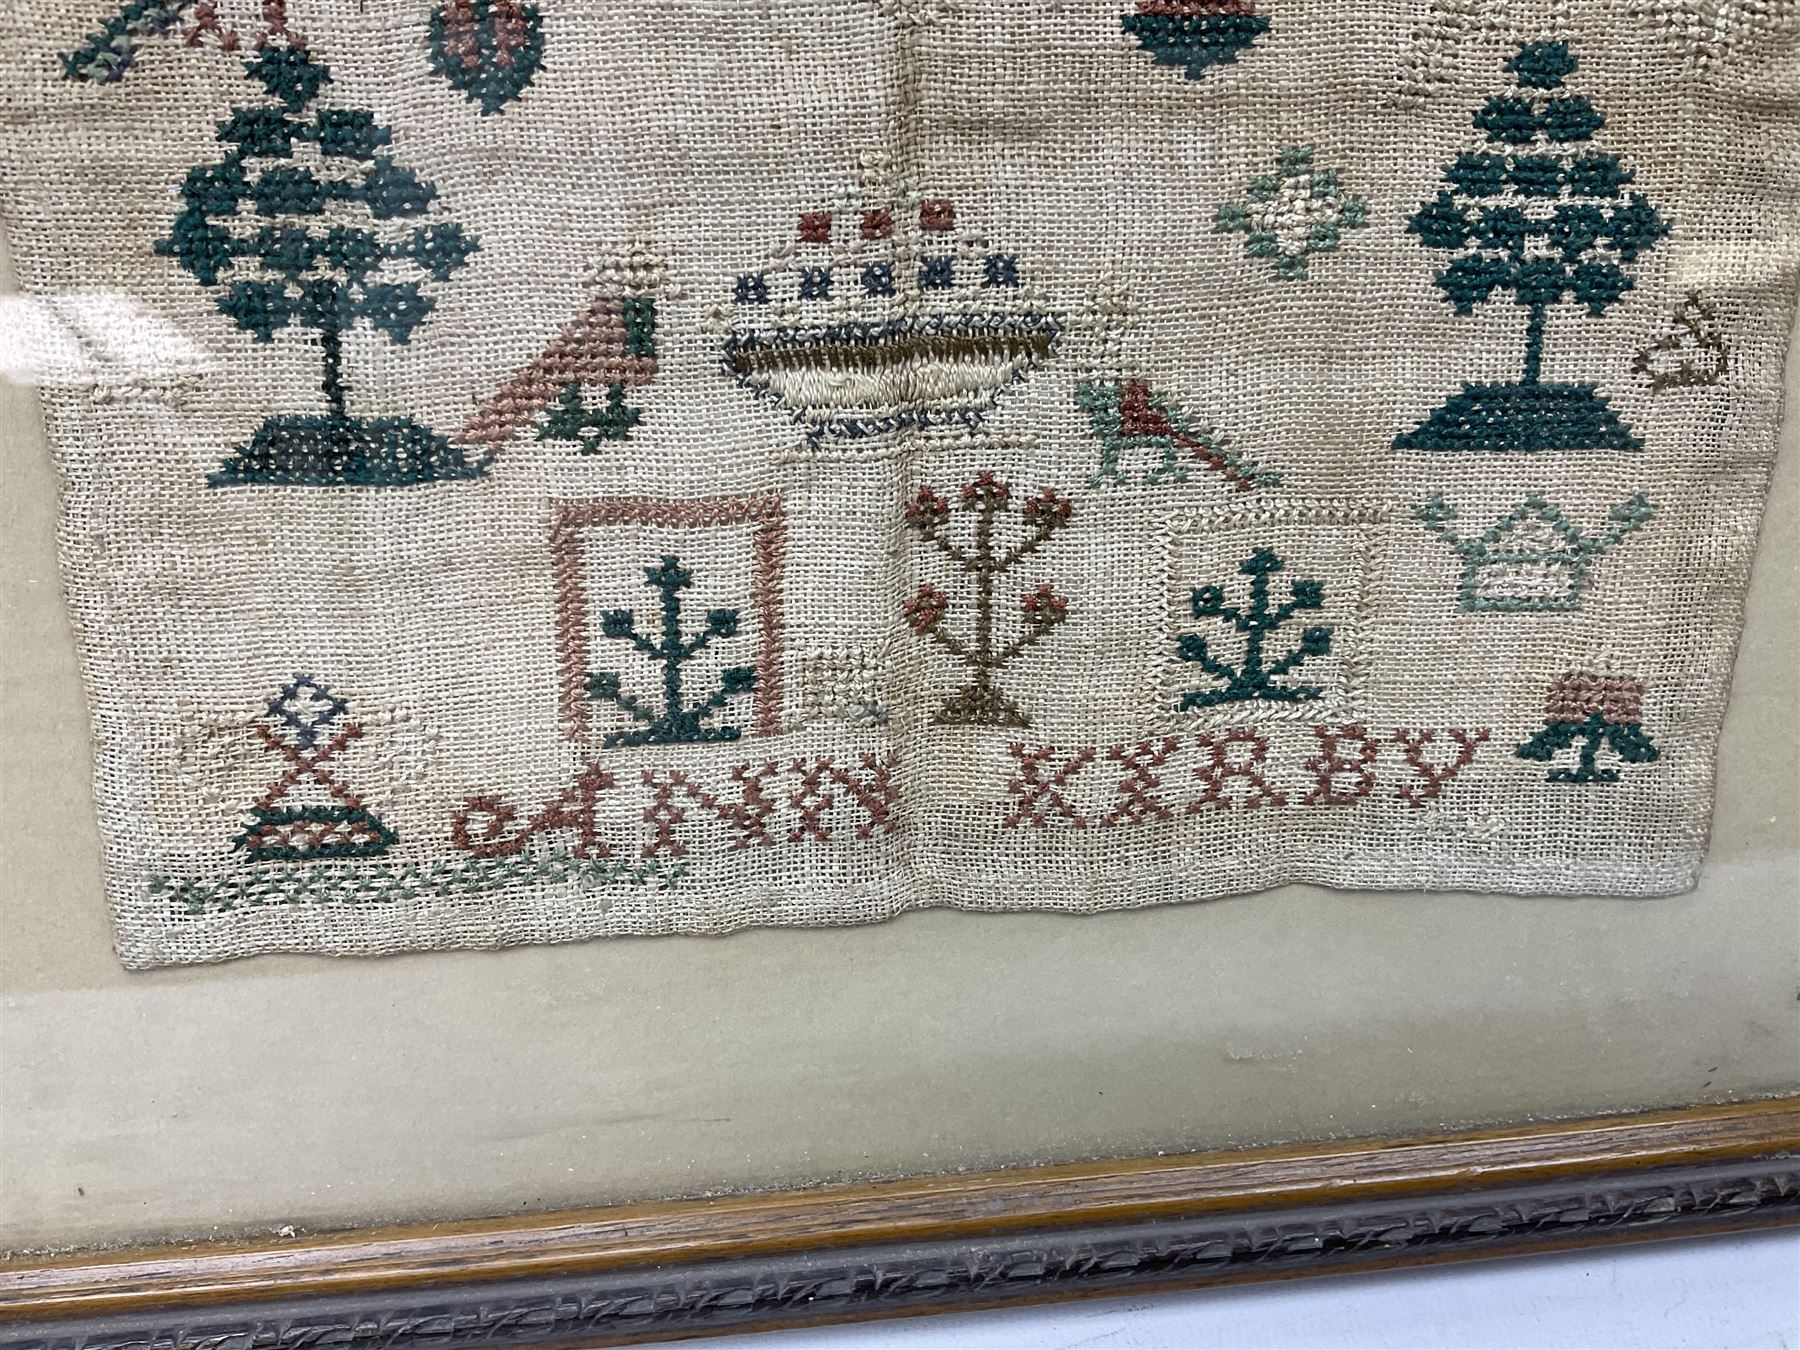 Two 19th century needlework samplers by Ann Kirby - Image 5 of 5